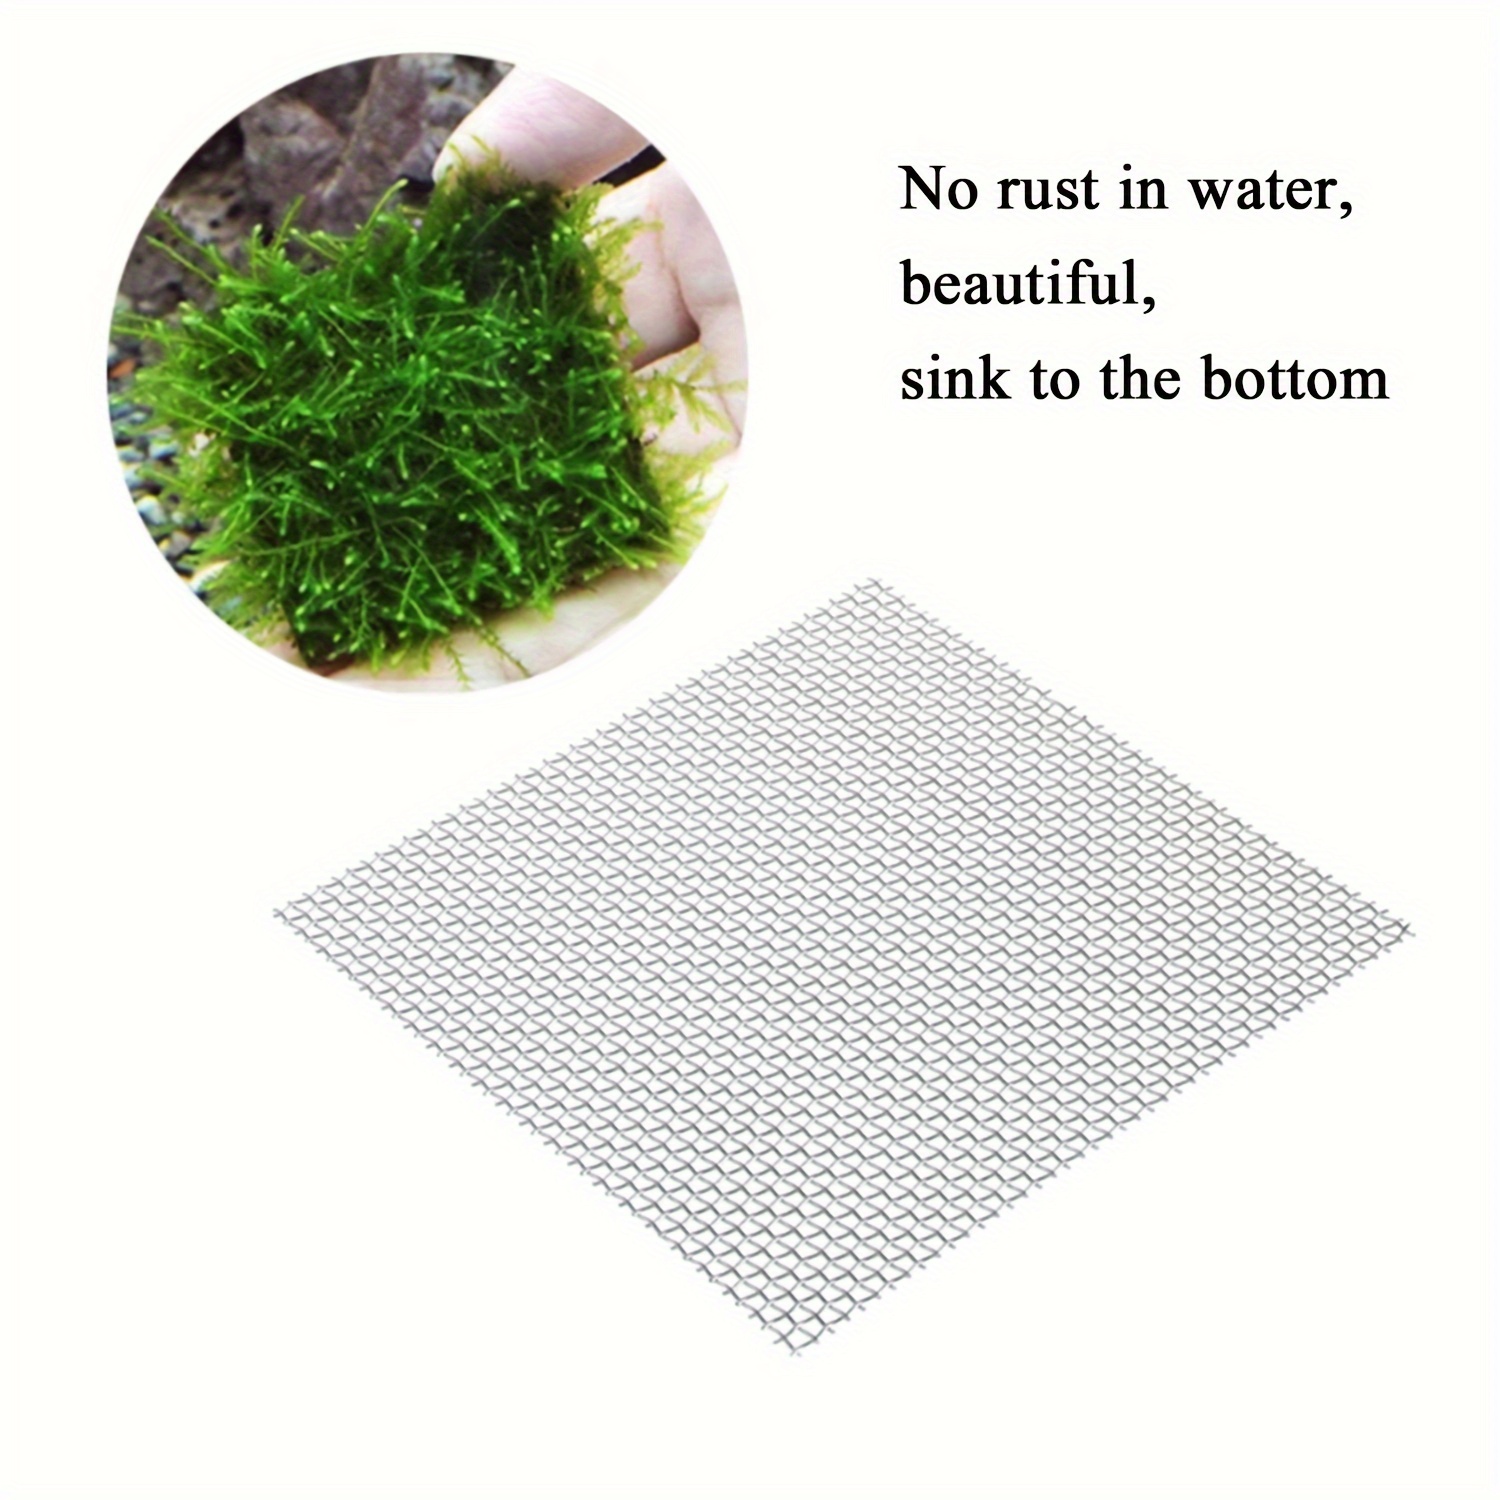 

8 Pcs/12 304 Stainless Steel Woven Wire Mesh Filter Screen For Aquariums - Rust-proof, Harmless To Fish And Plants, Fine Mesh For Effective Filtration